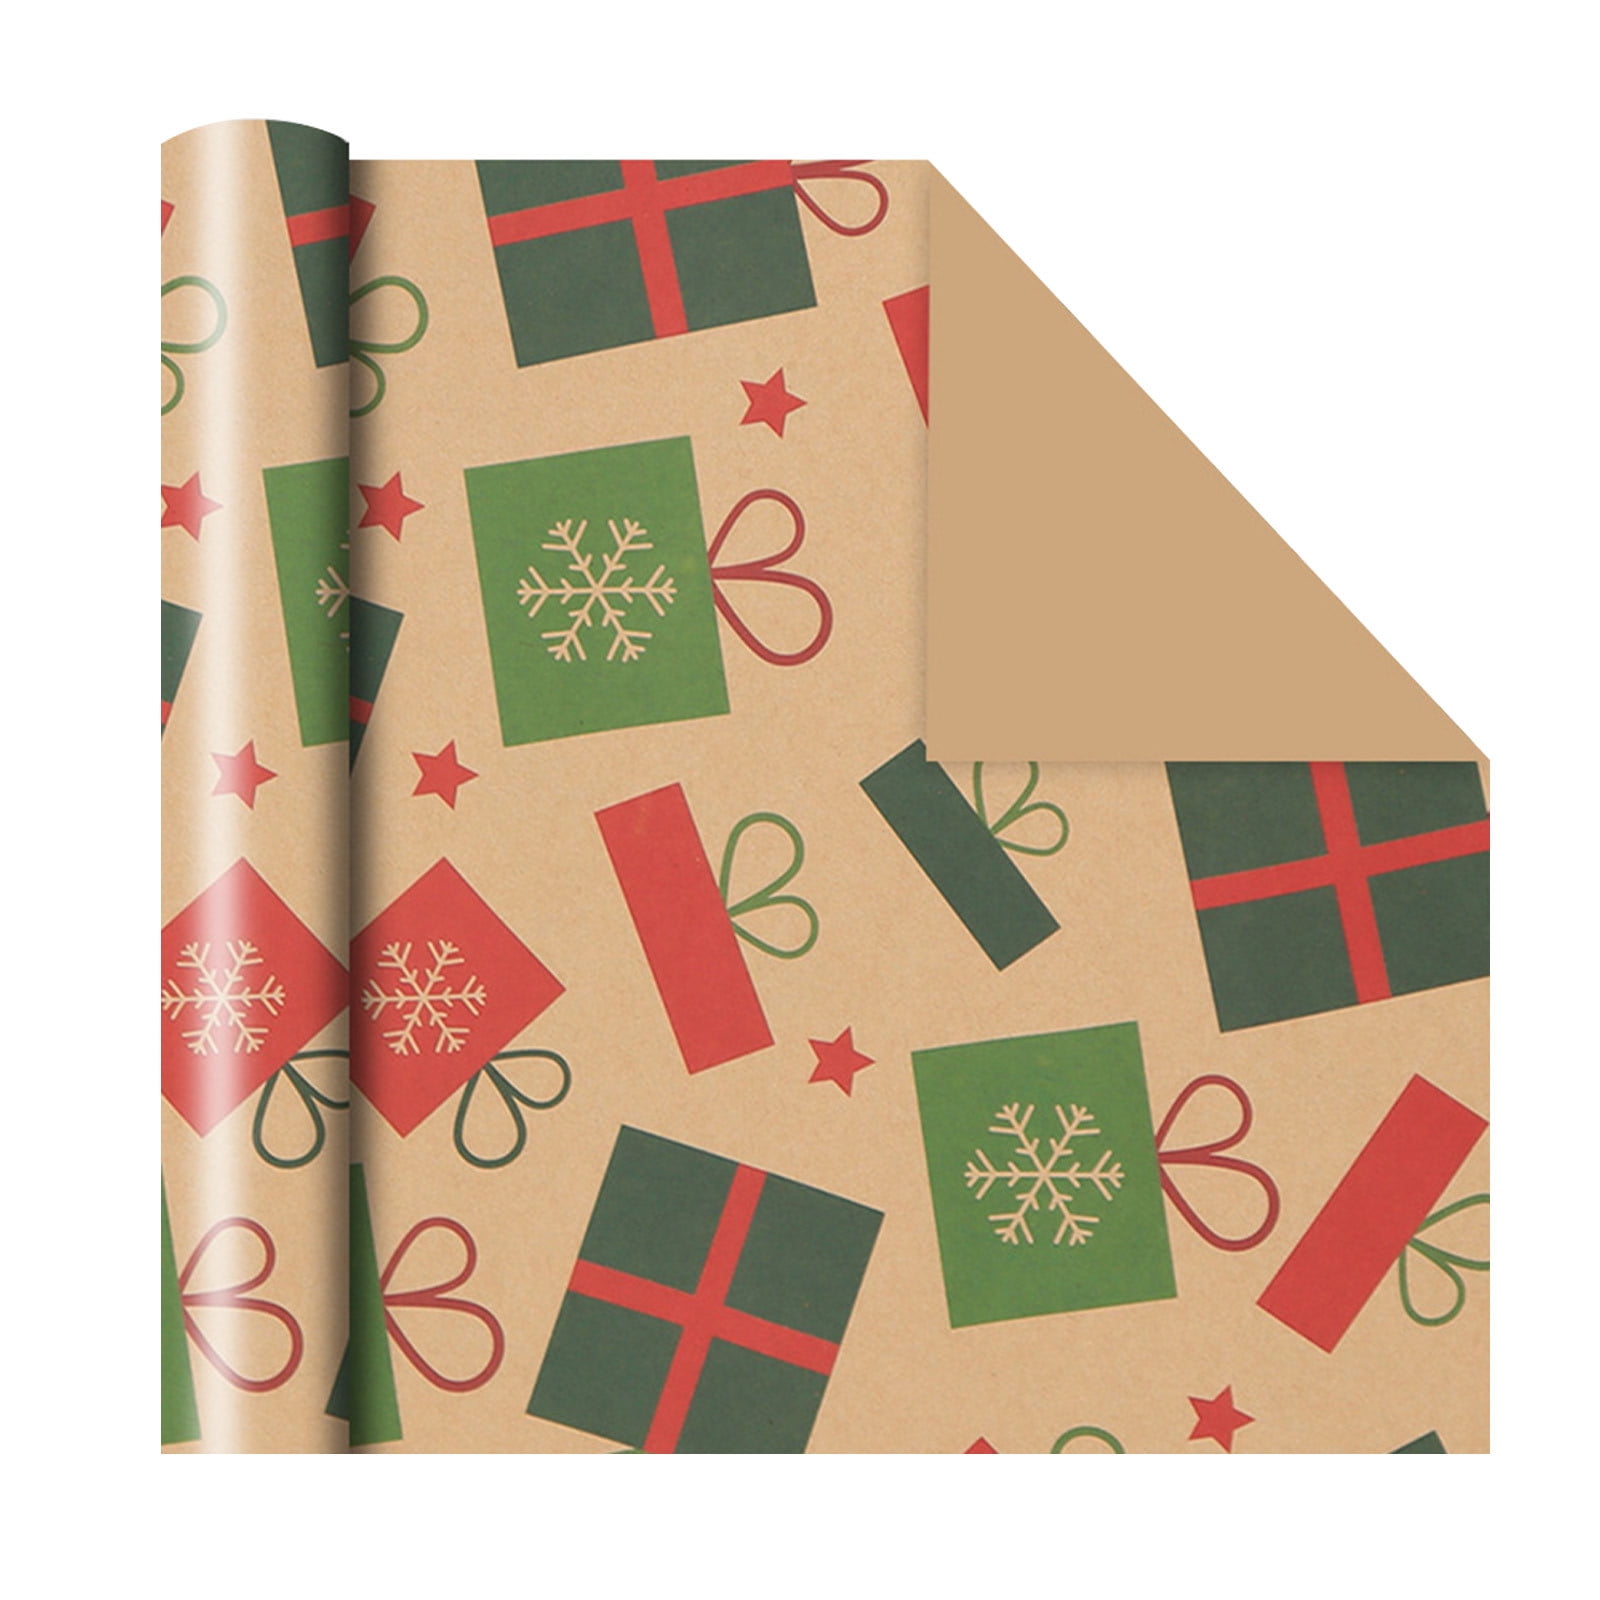 Jacenvly Christmas Wrapping Paper Clearance Christmas Gift Paper Vintage  Floral Paper Kraft Paper Wrapping Paper Christmas Ornaments